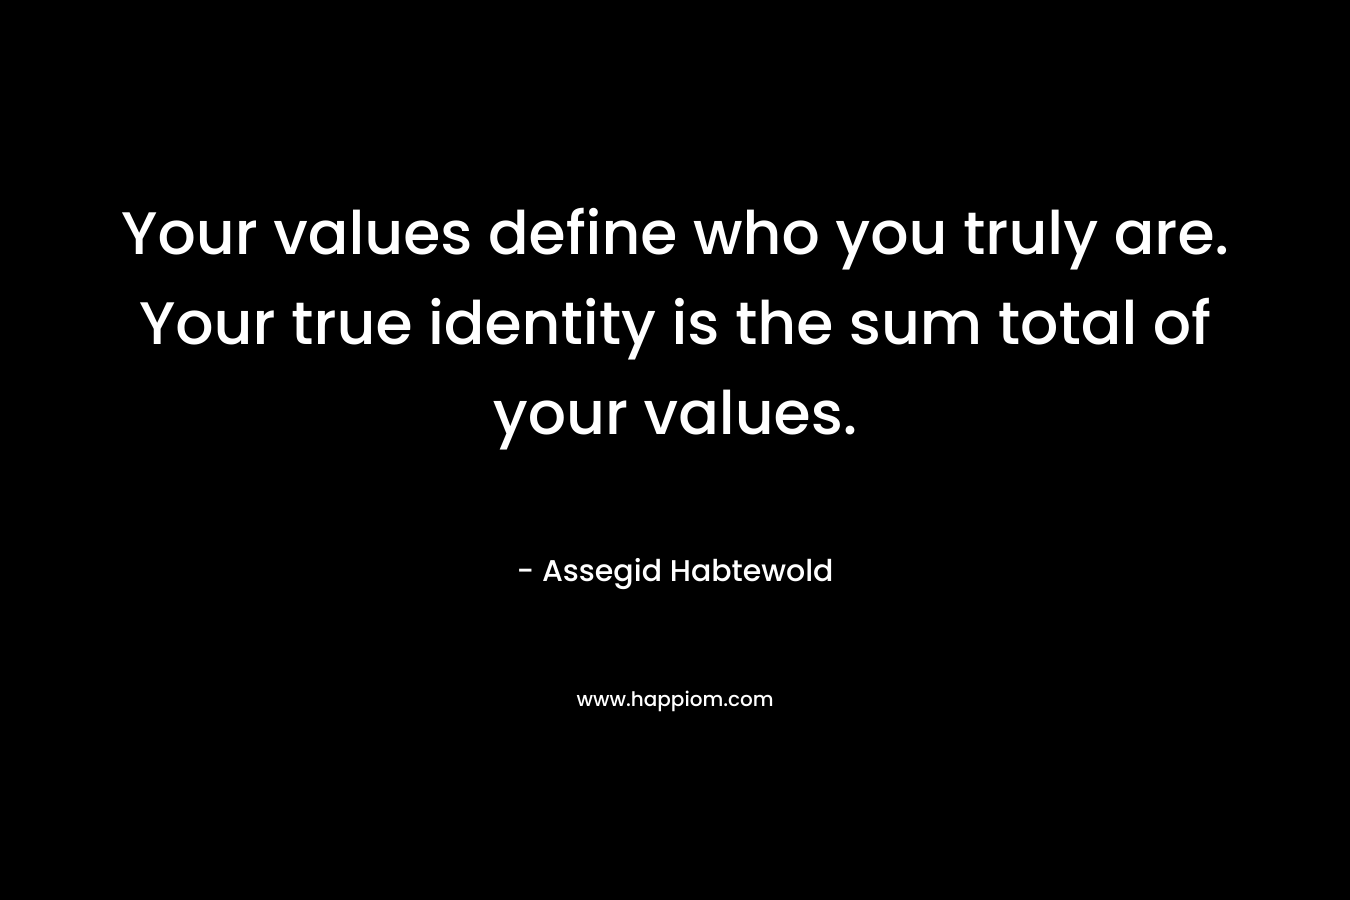 Your values define who you truly are. Your true identity is the sum total of your values. – Assegid Habtewold